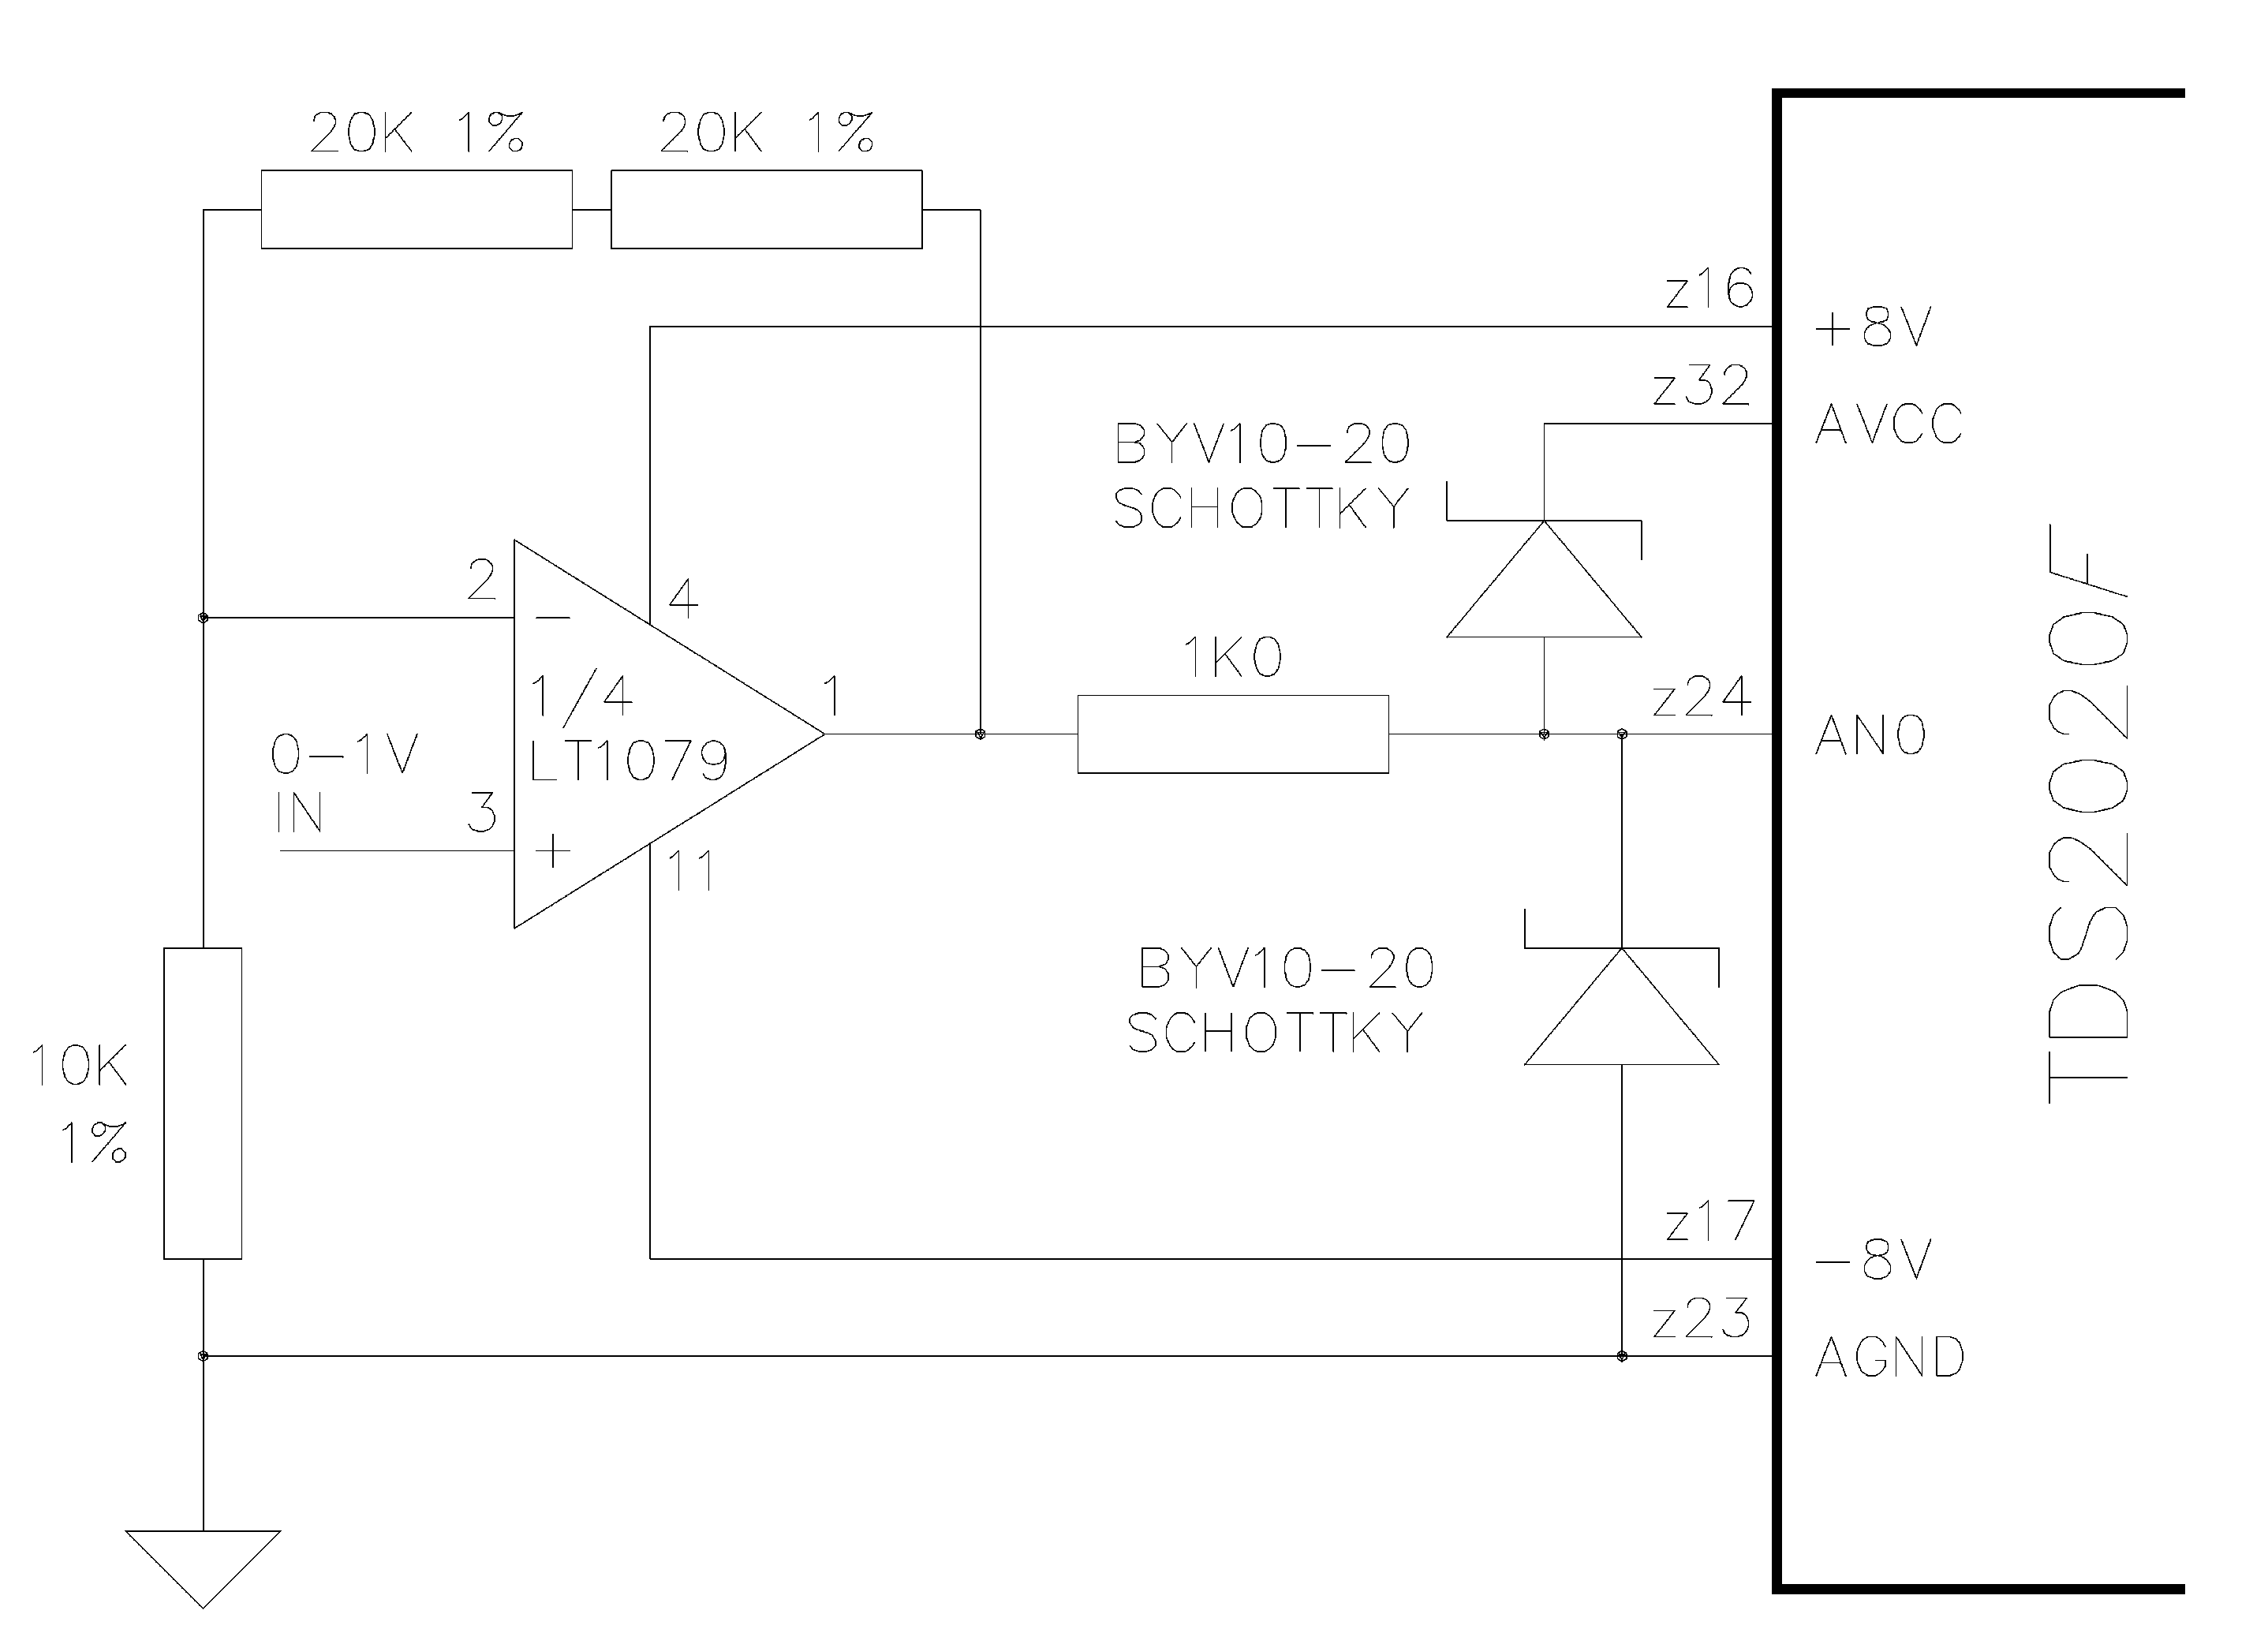 A to D input amplifier suggestion